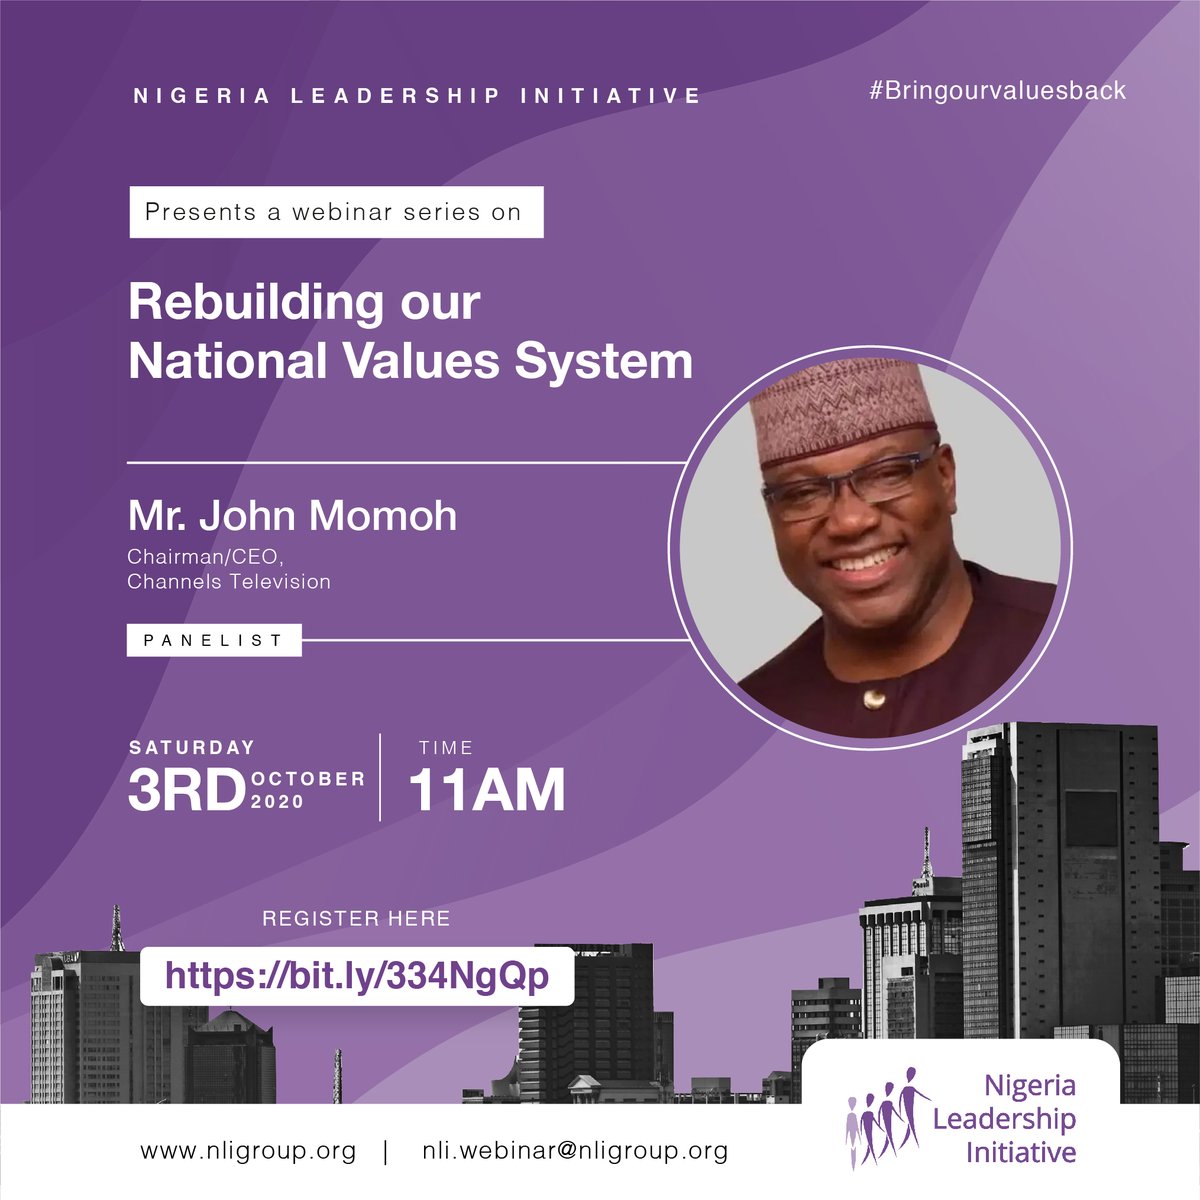 We are delighted to have @joomomoh join our panel of speakers. Mr. Momoh is the Chairman of Channels Media Group and Chairman and Chief Executive Officer of @channelstv. Join us this Sat 3rd Oct at 11am. Click here to register: bit.ly/334NgQp